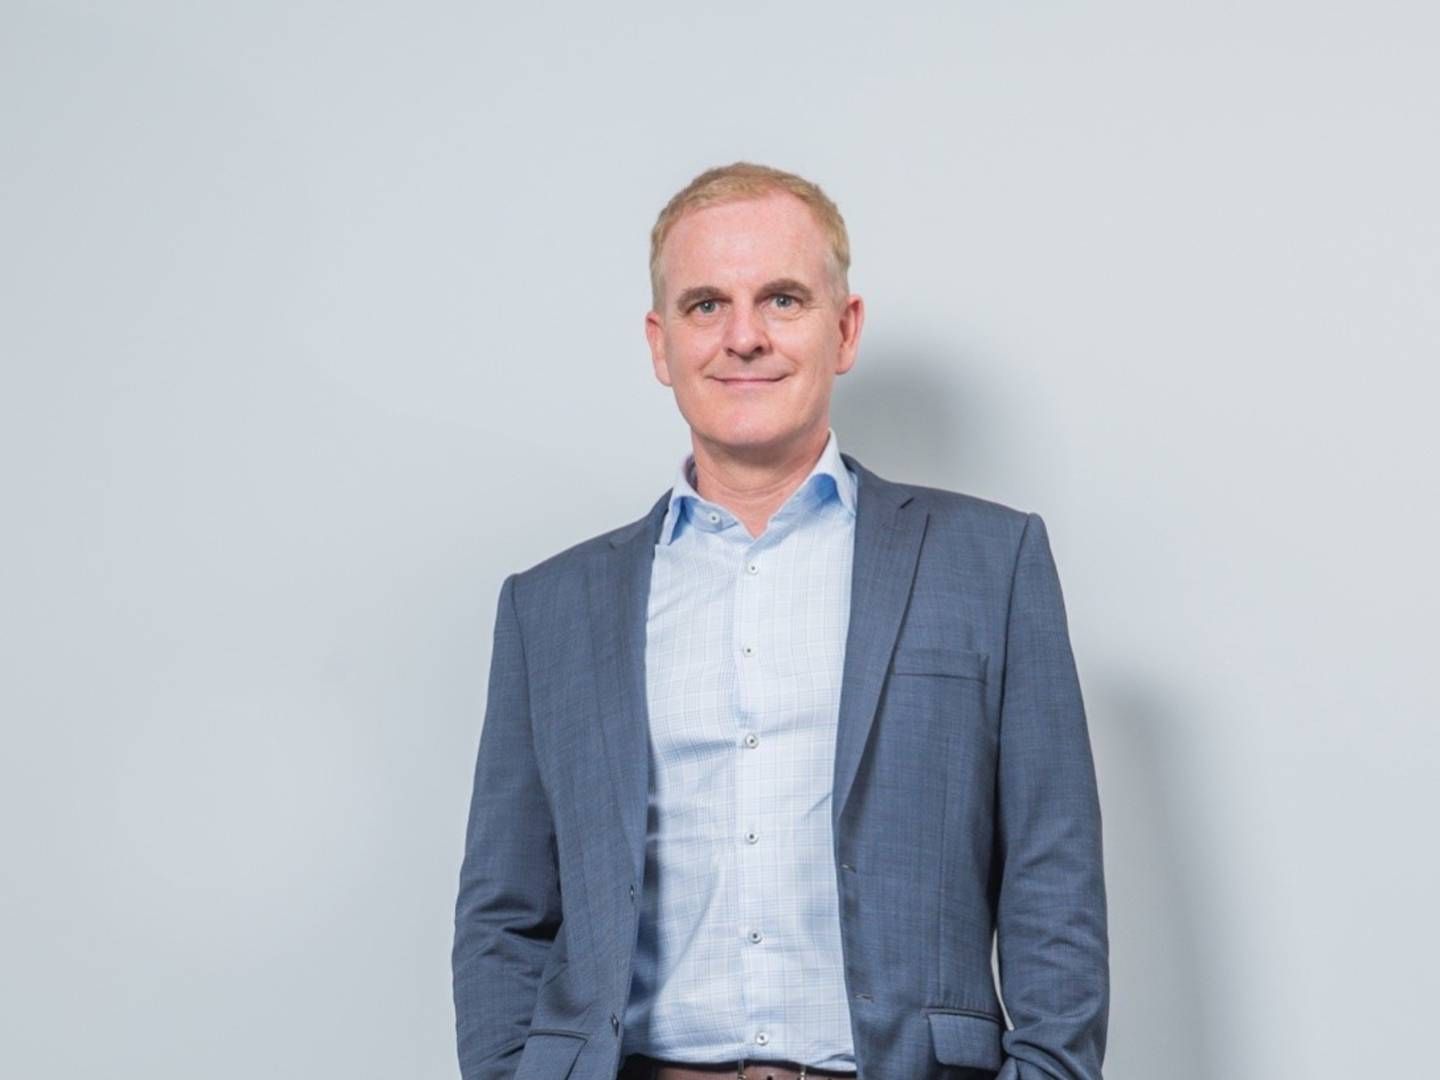 Claus Thomsen is executive vice president for DSV Air & Sea Asia-Pacific and has lived in Shanghai for 19 years. In recent weeks, he has lived under the strict Covid lockdown in the major city. | Photo: DSV